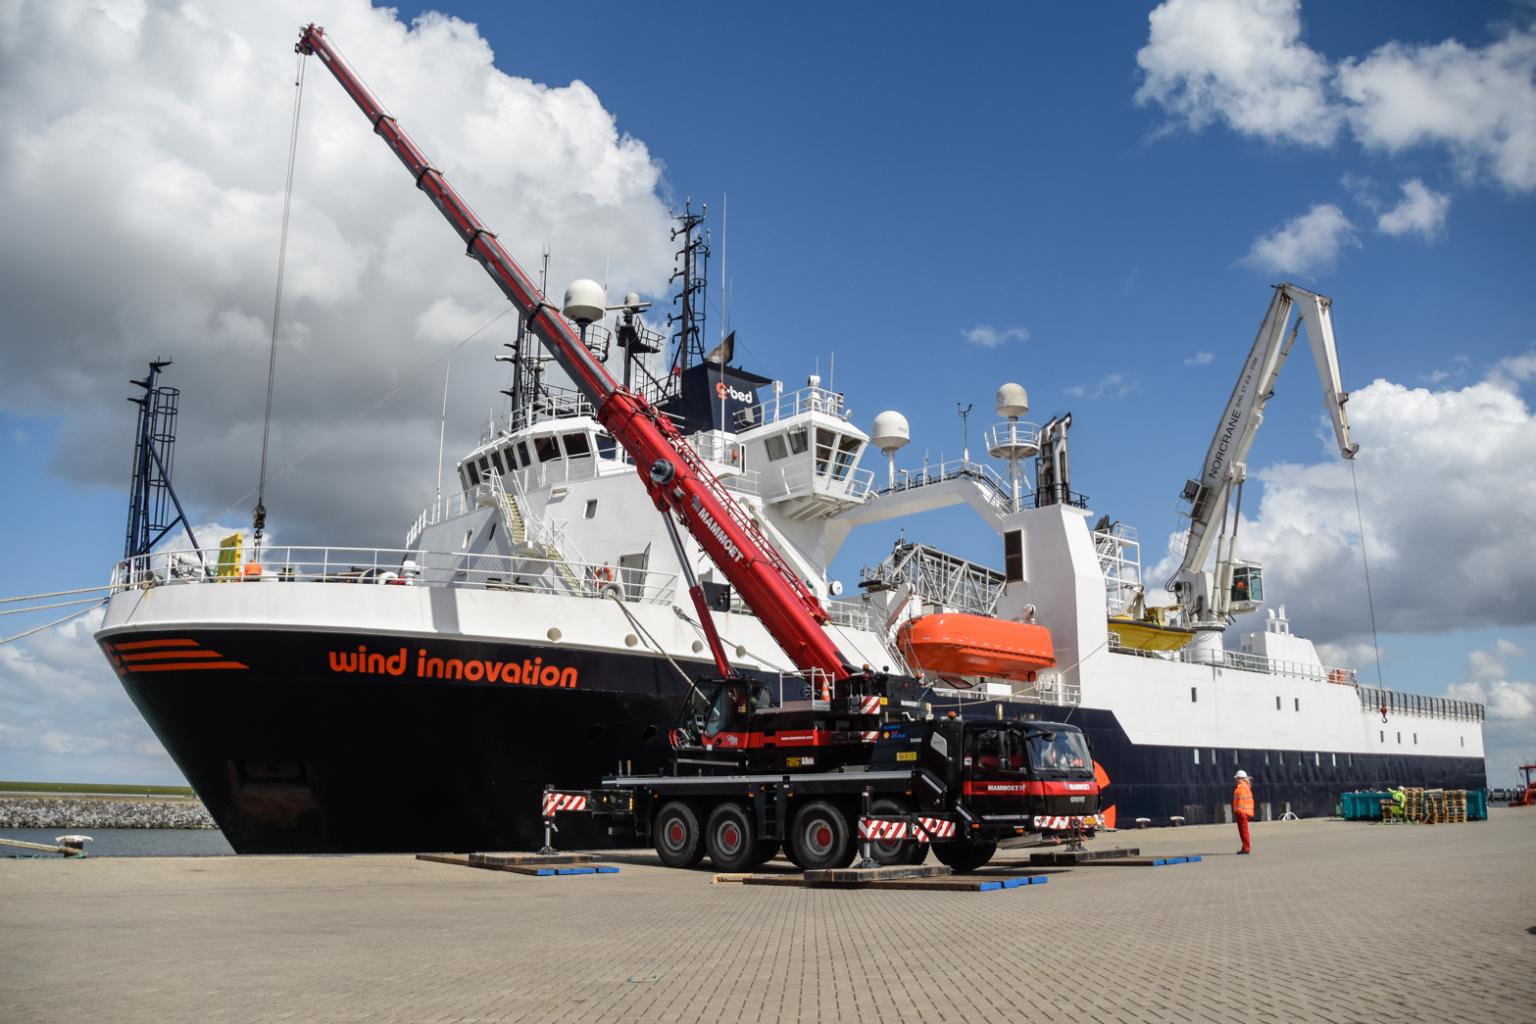 A photo of the Wind Innovation vessel mobilising for Borkum Riffgrund 2 offshore wind farm